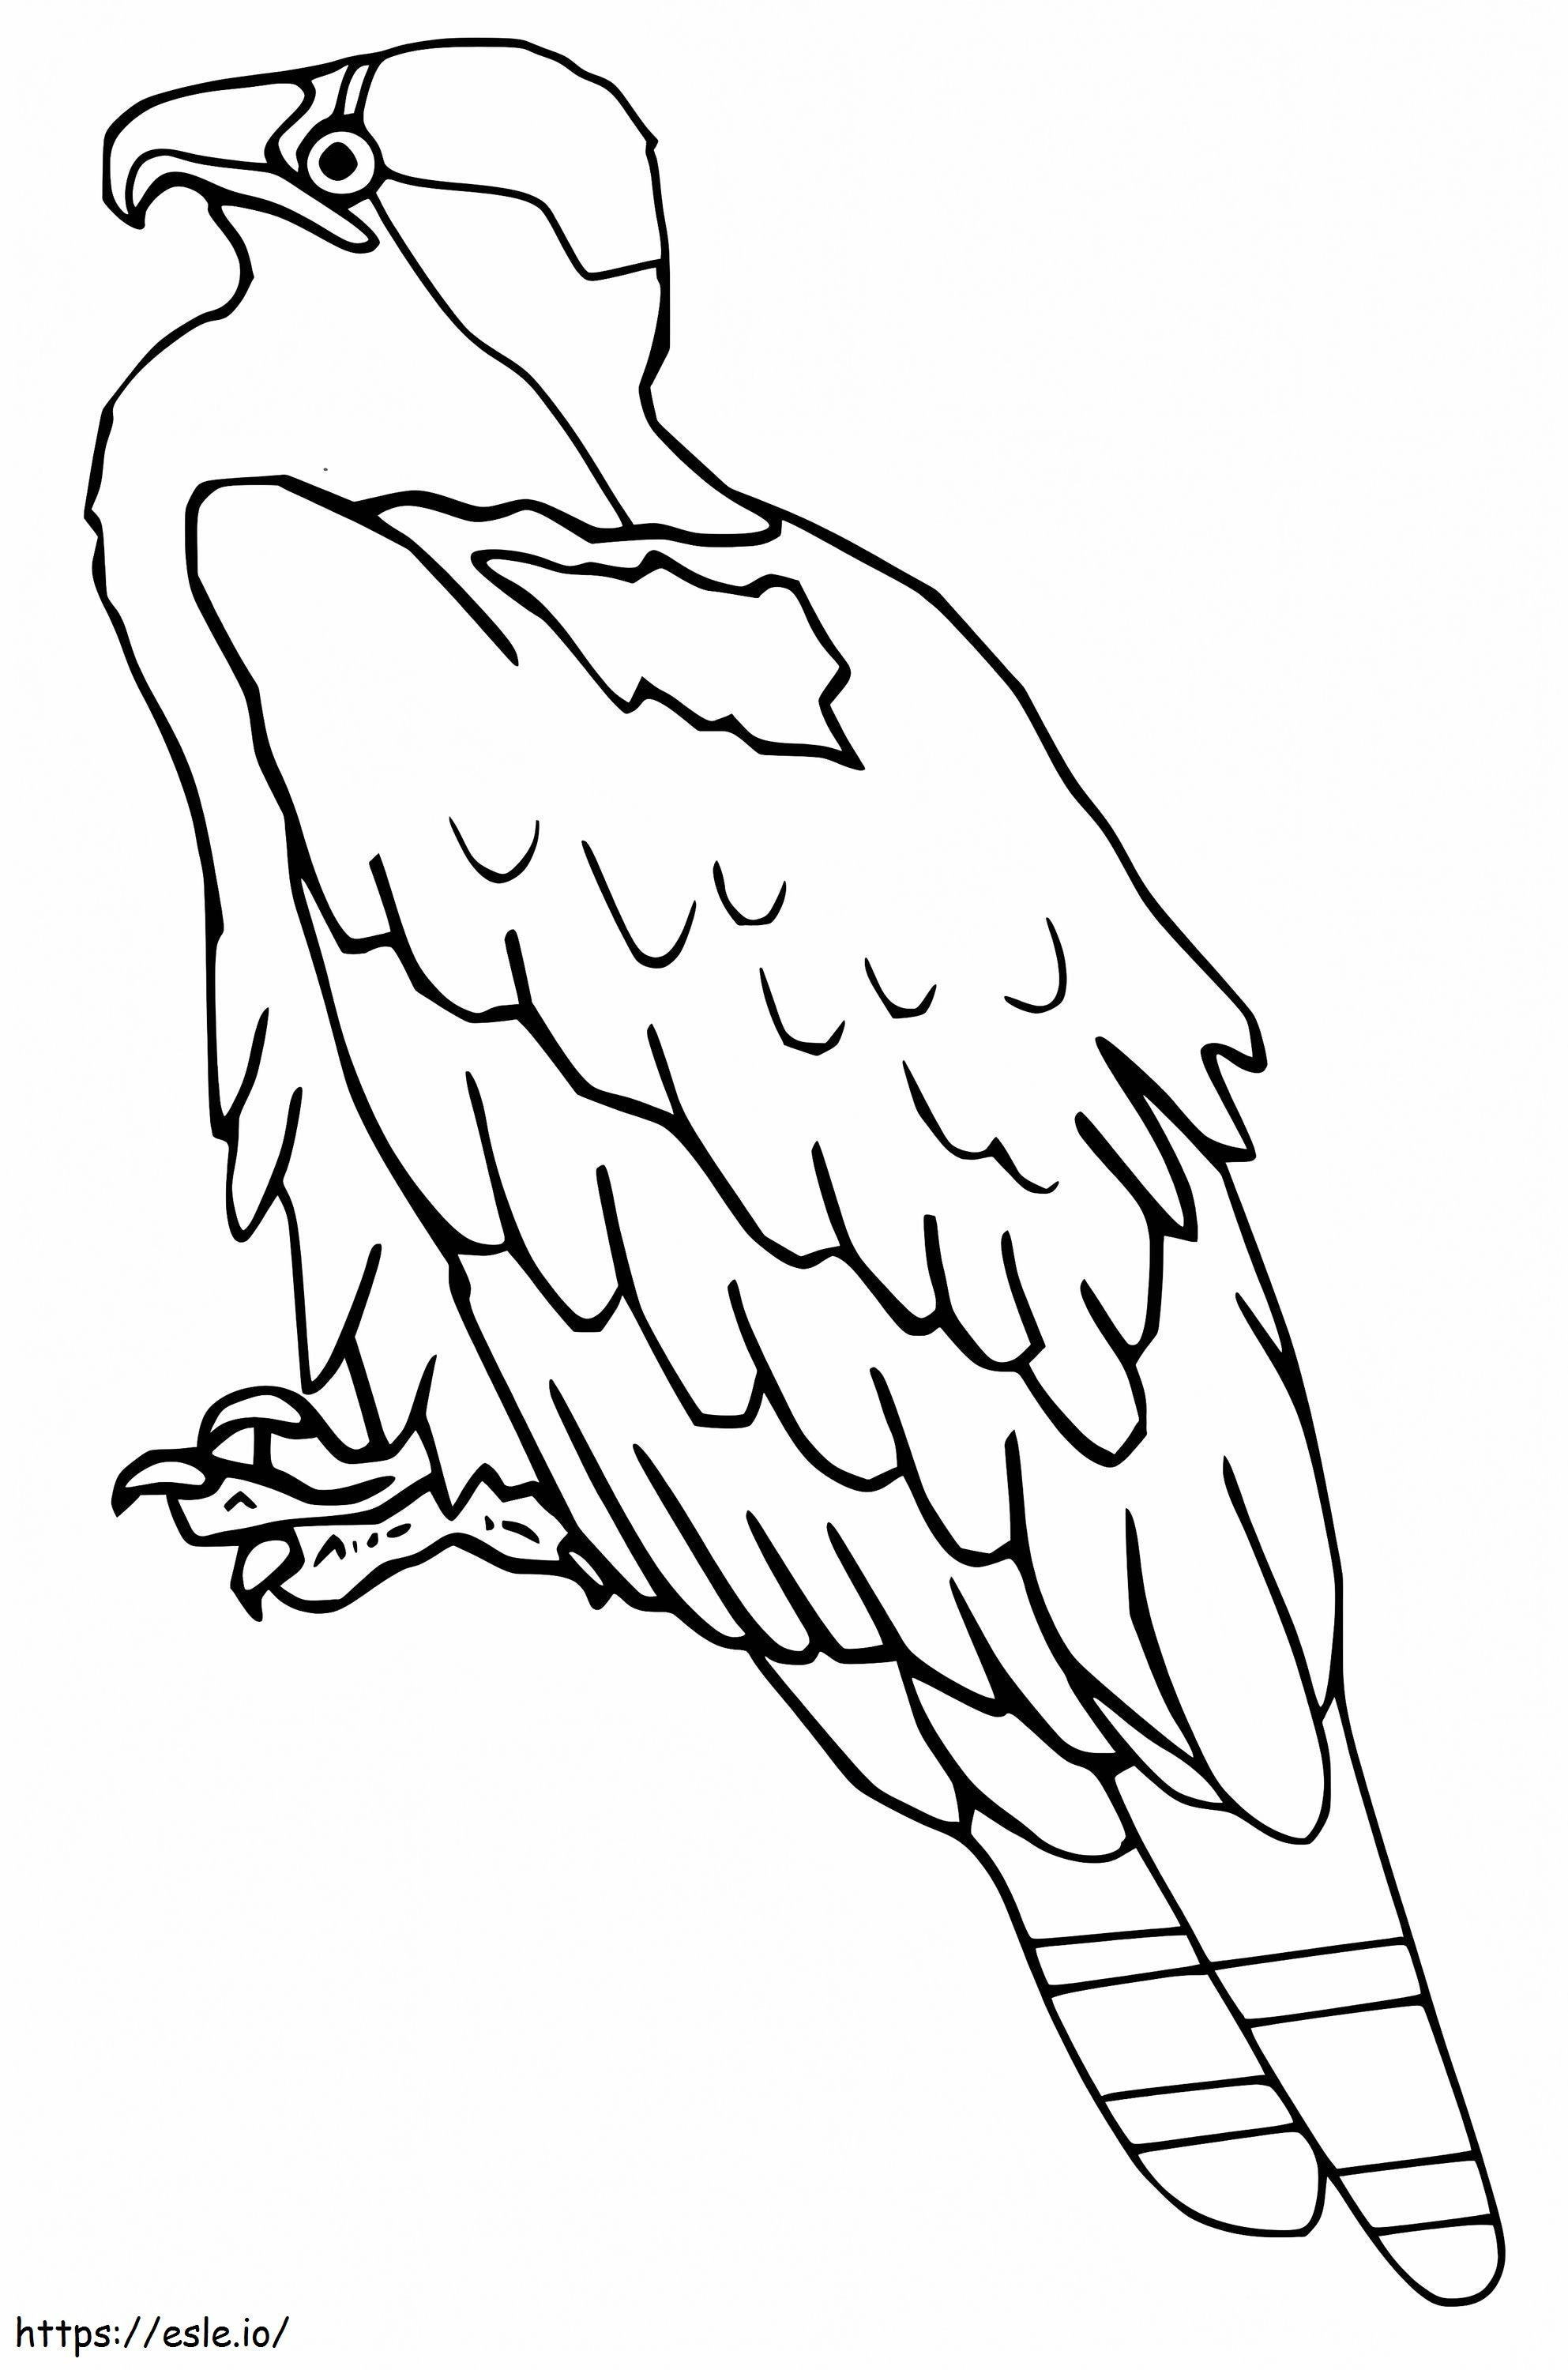 Normal Osprey coloring page